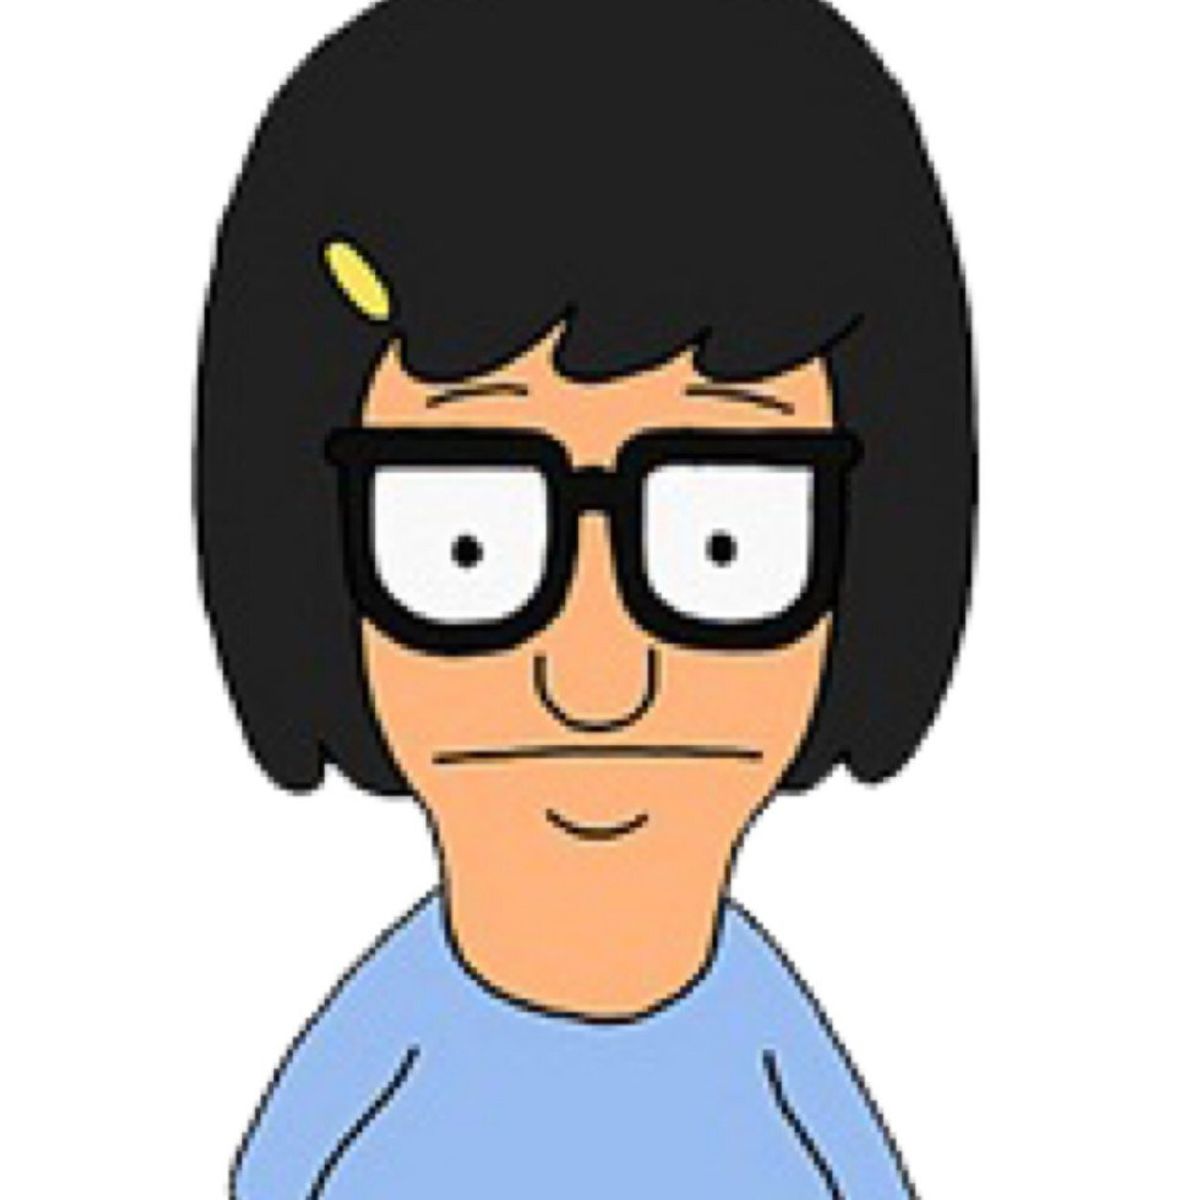 8 Struggles Of College Students As Told By Tina Belcher